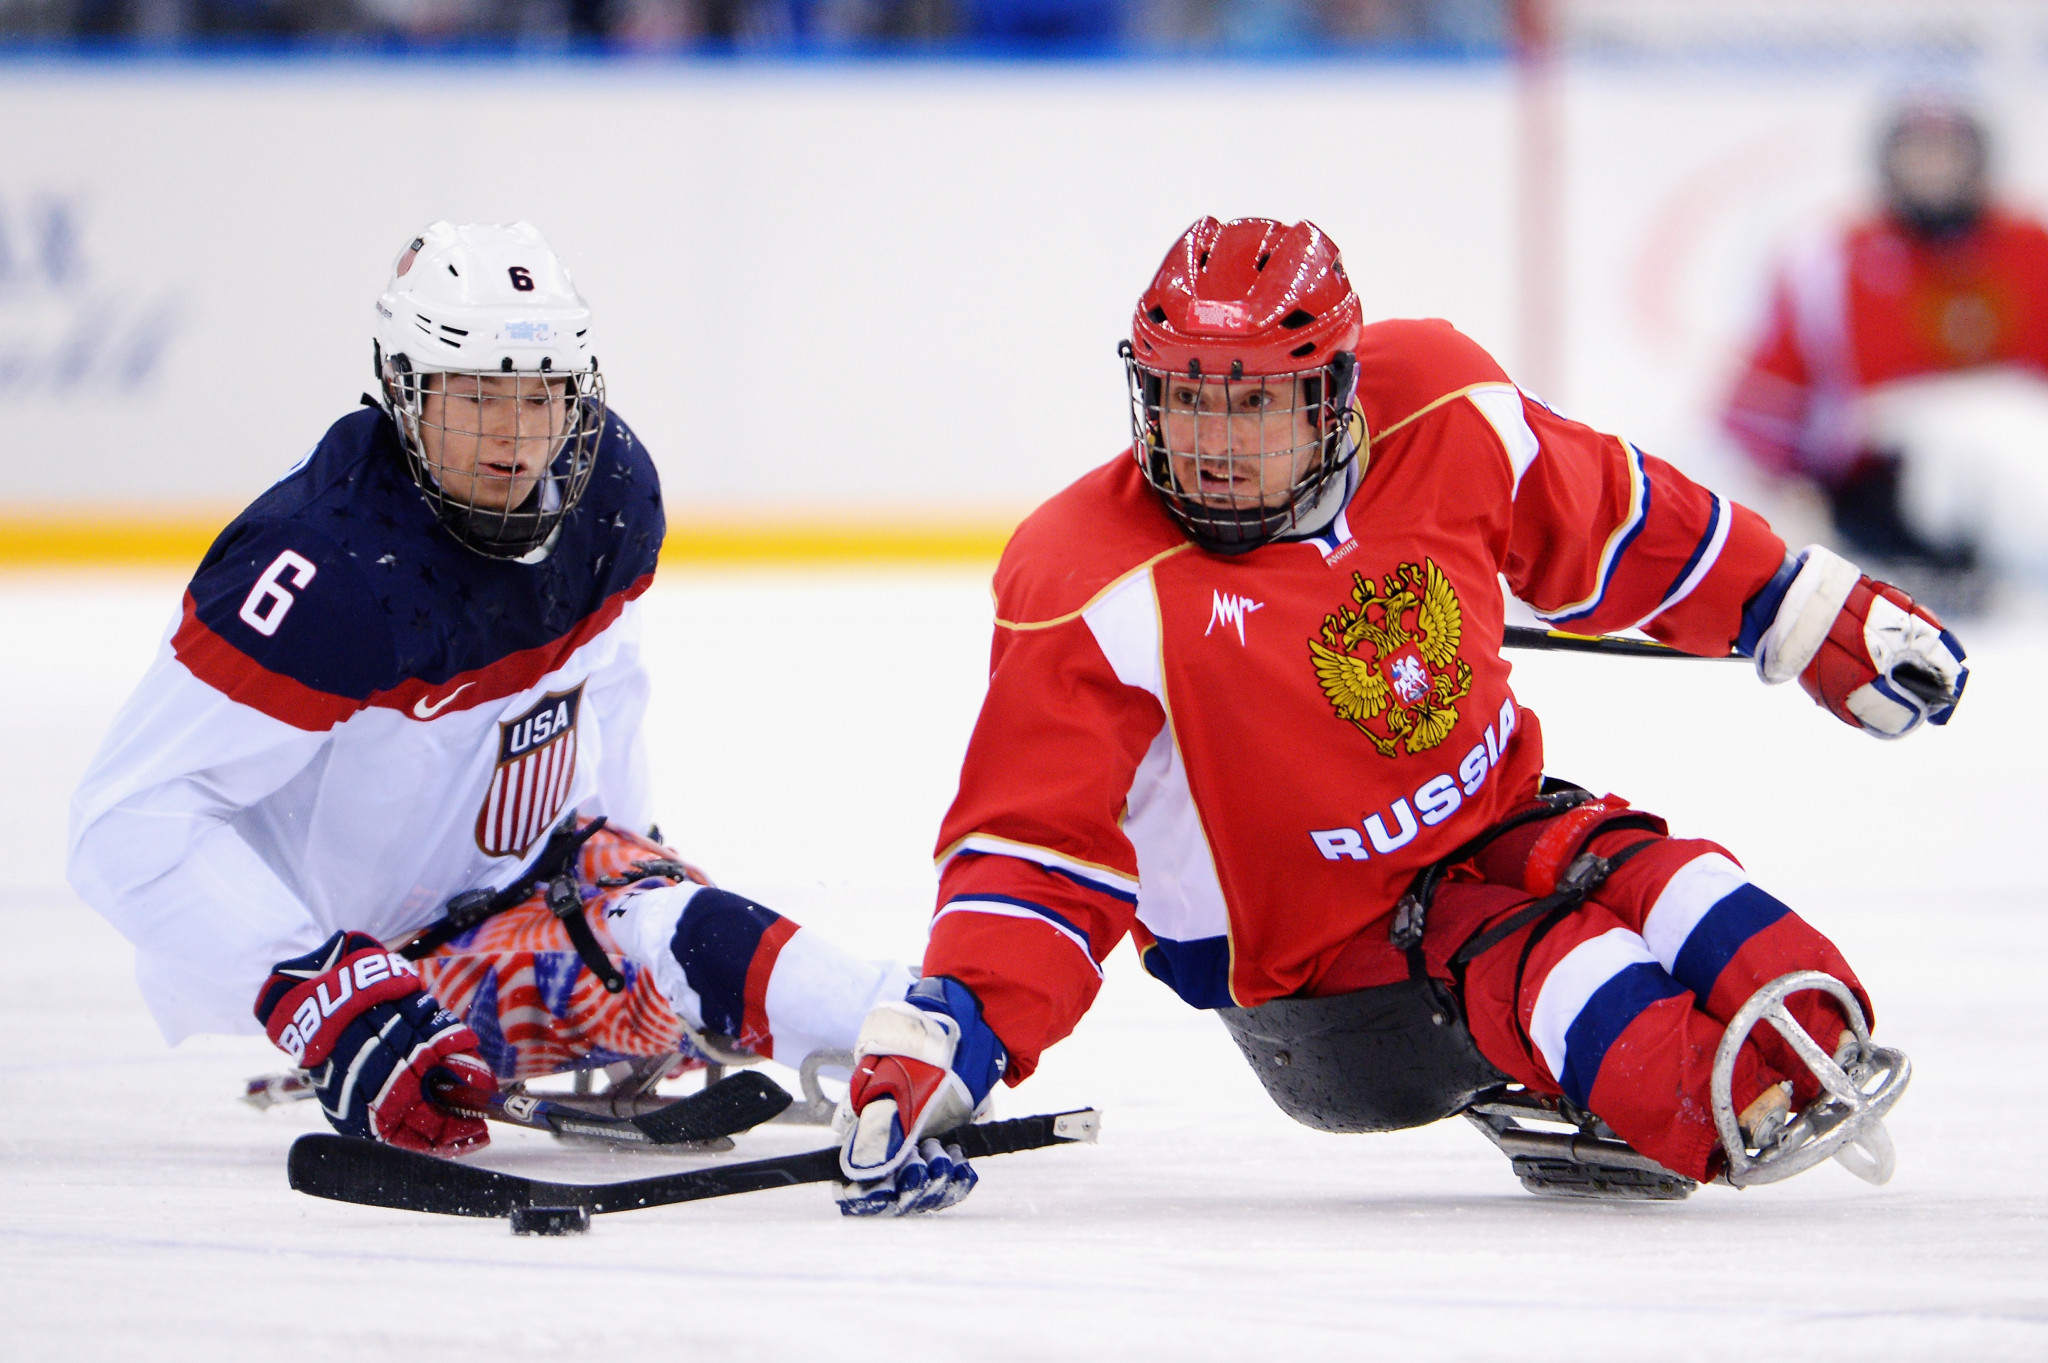 Russian Para ice hockey player Konstantin Shikhov, in red, has been banned for 18 months after an IPC appeal to CAS ©Getty Images 